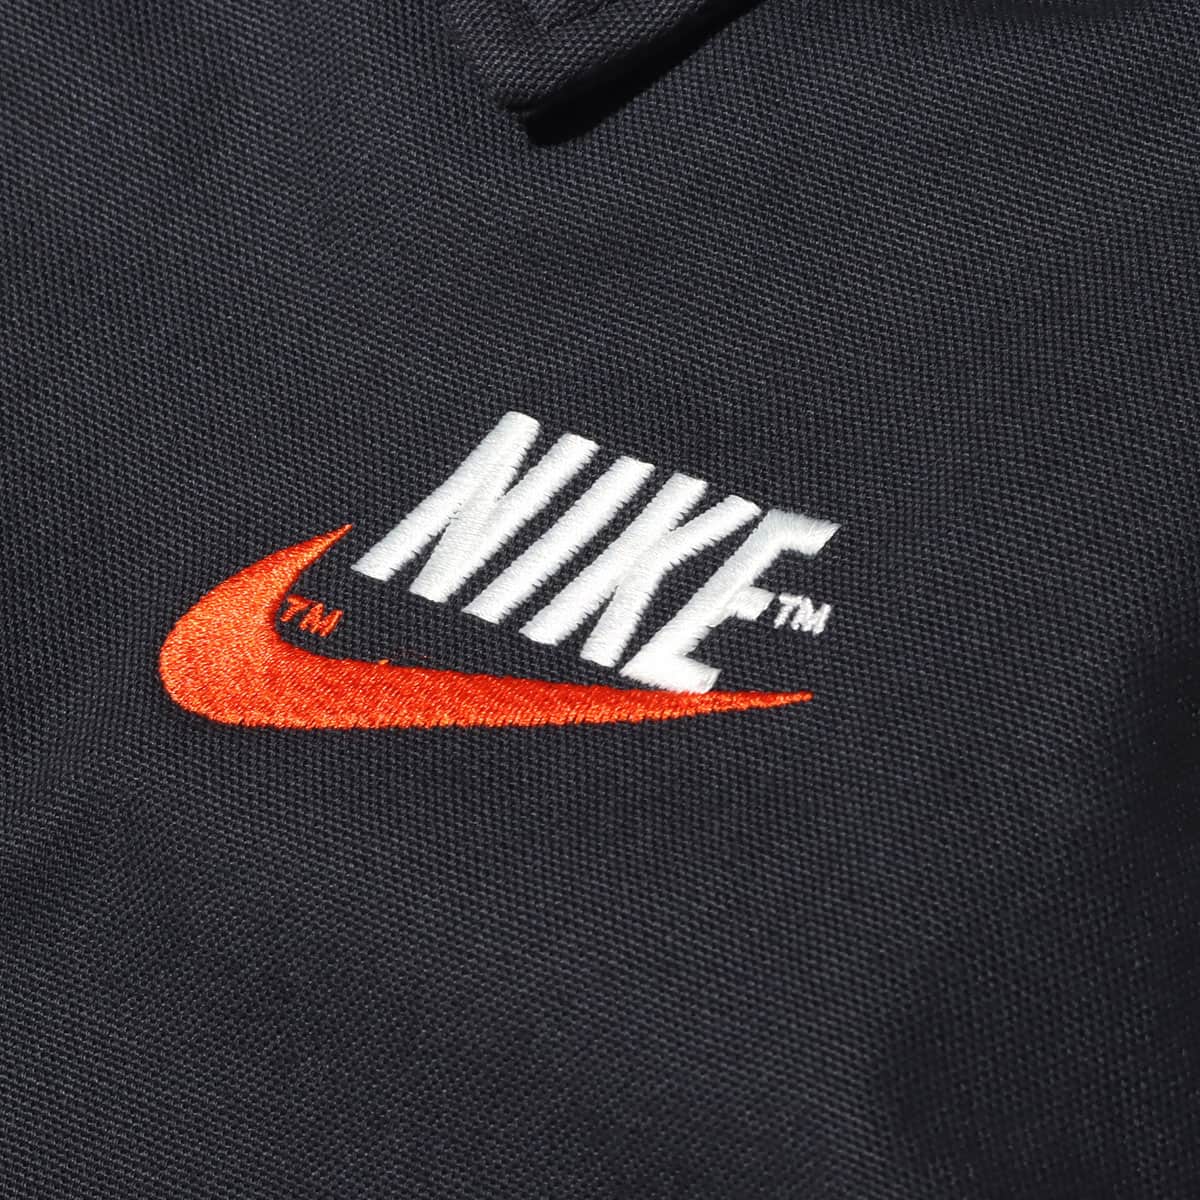 NIKE AS M NSW NIKE TREND WC 1 OFF NOIR/SAIL 22SP-I